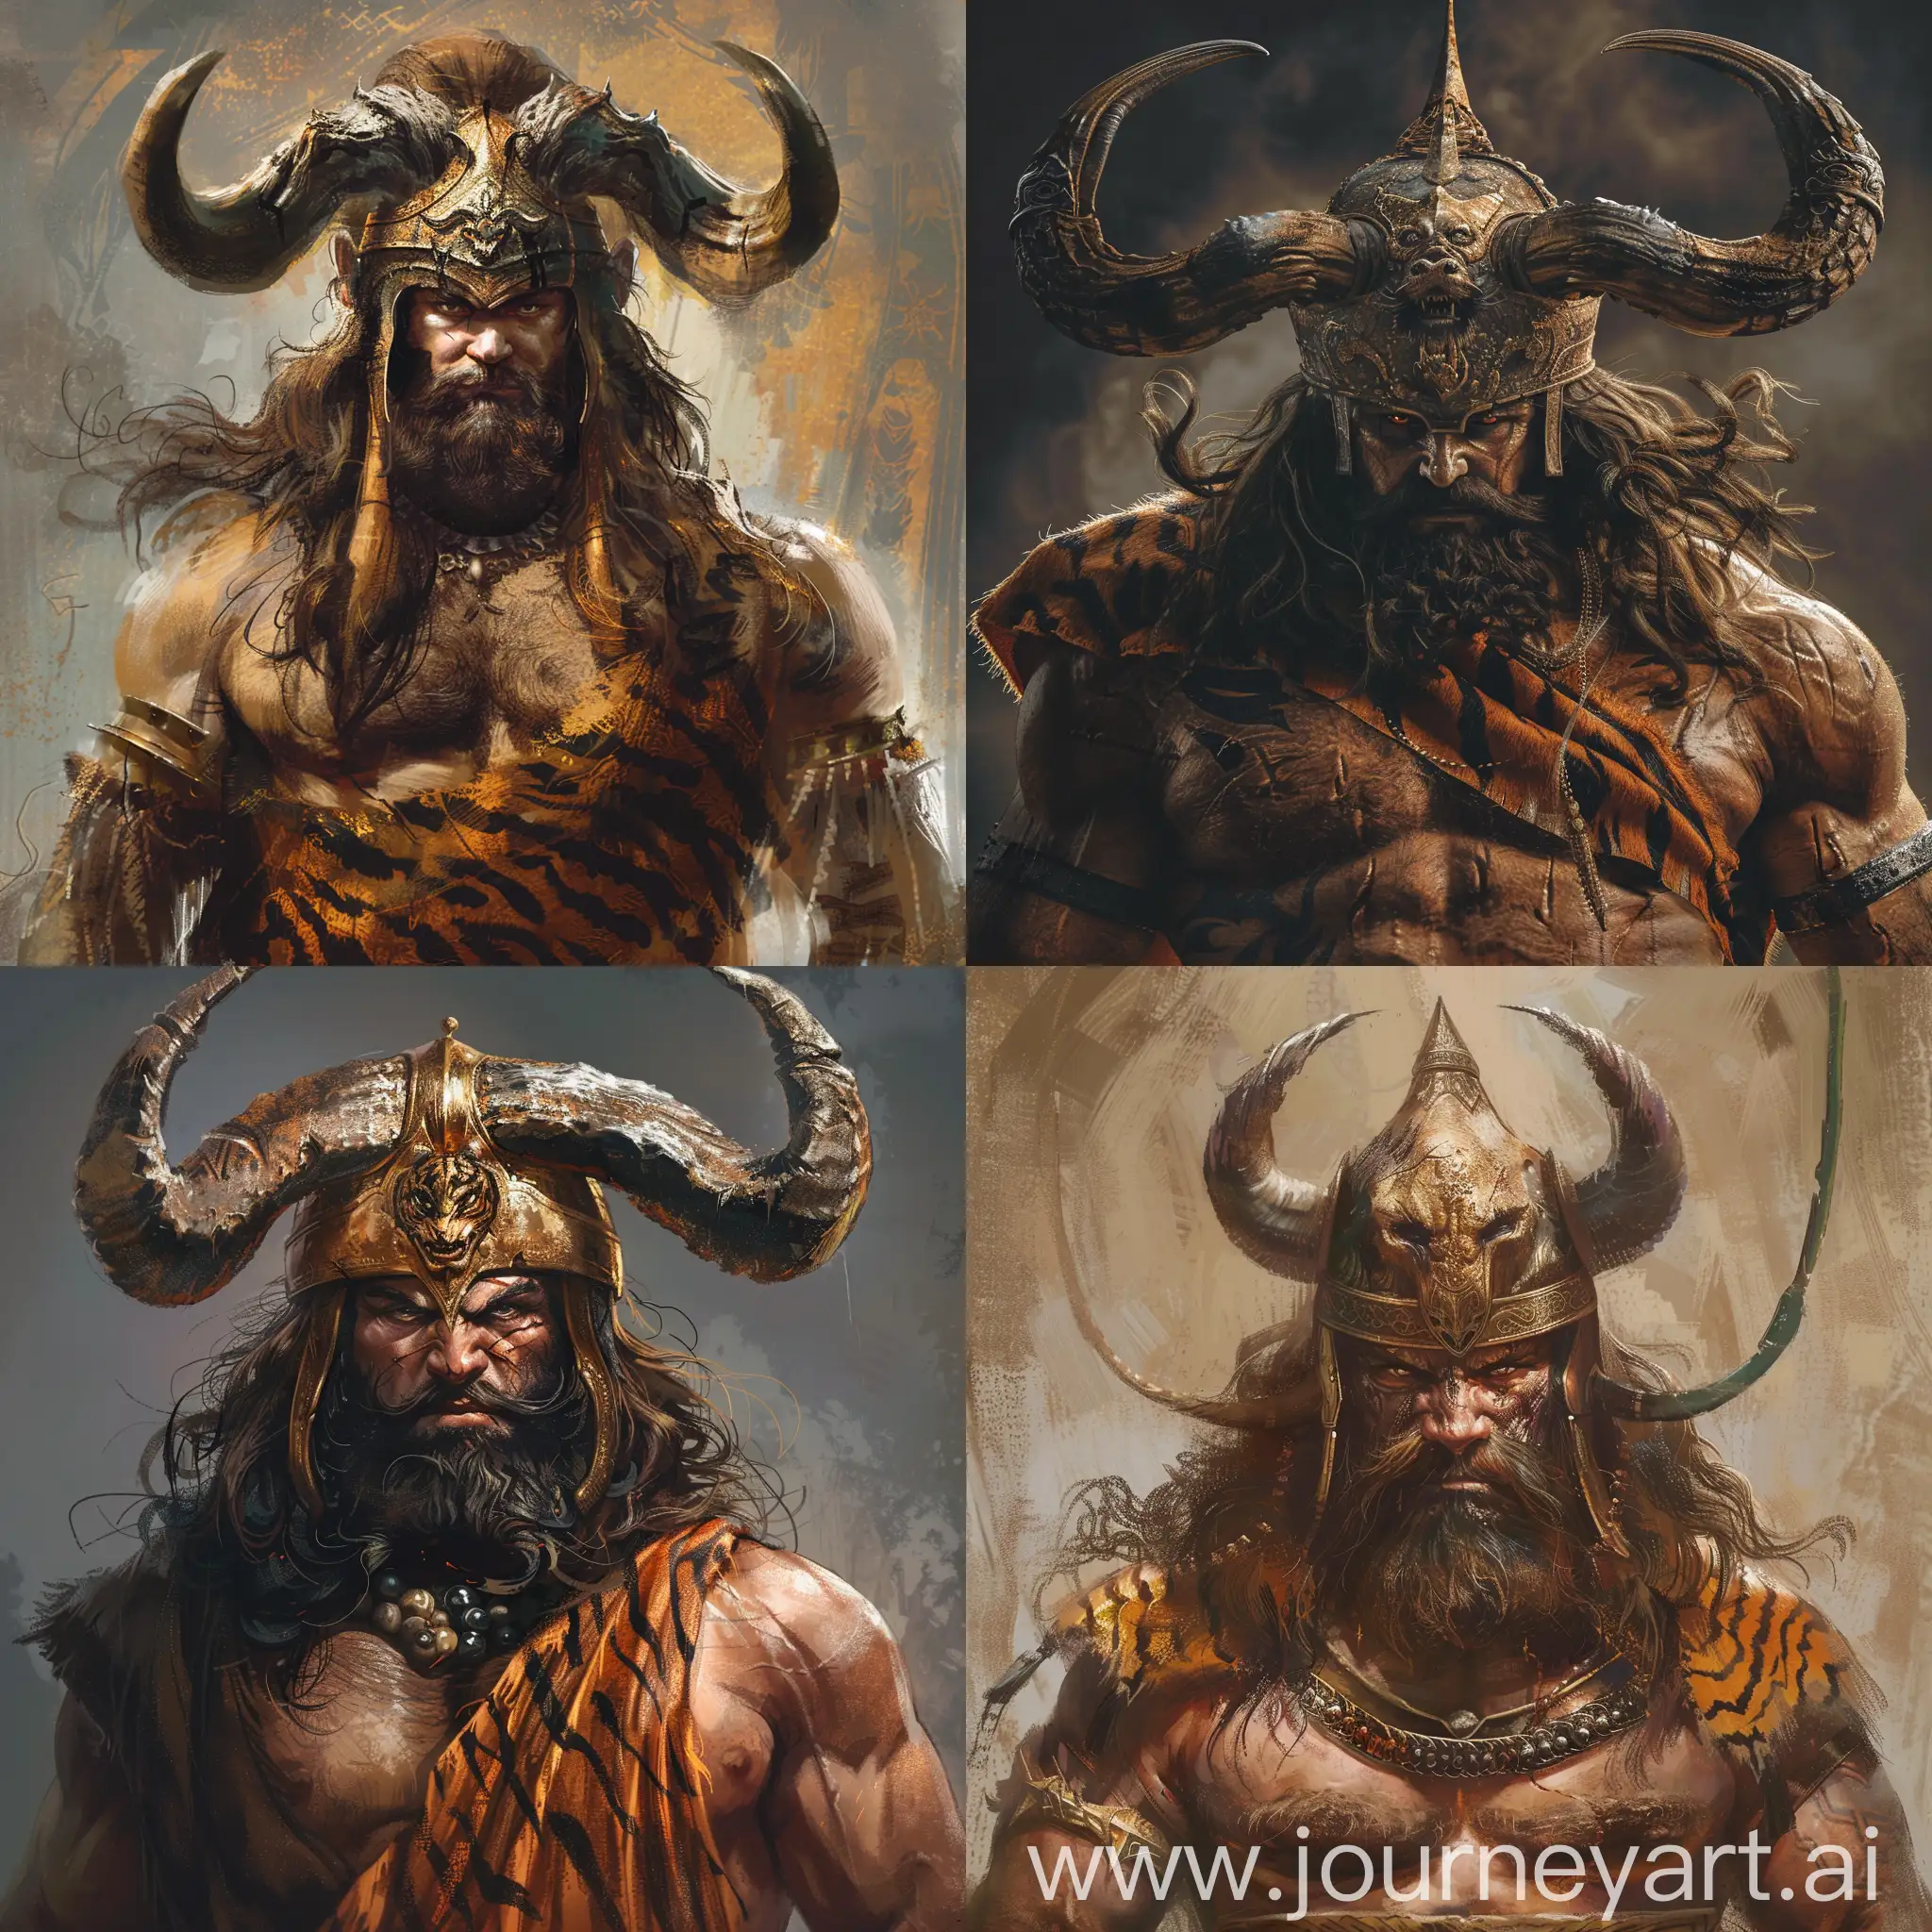 I want you to recreate the face of an ancient Persian commander in a fantasy way: a Persian man, his helmet with the face of a horned demon, his face an angry man with long brown hair and beard, a large body, wearing a tiger skin dress.